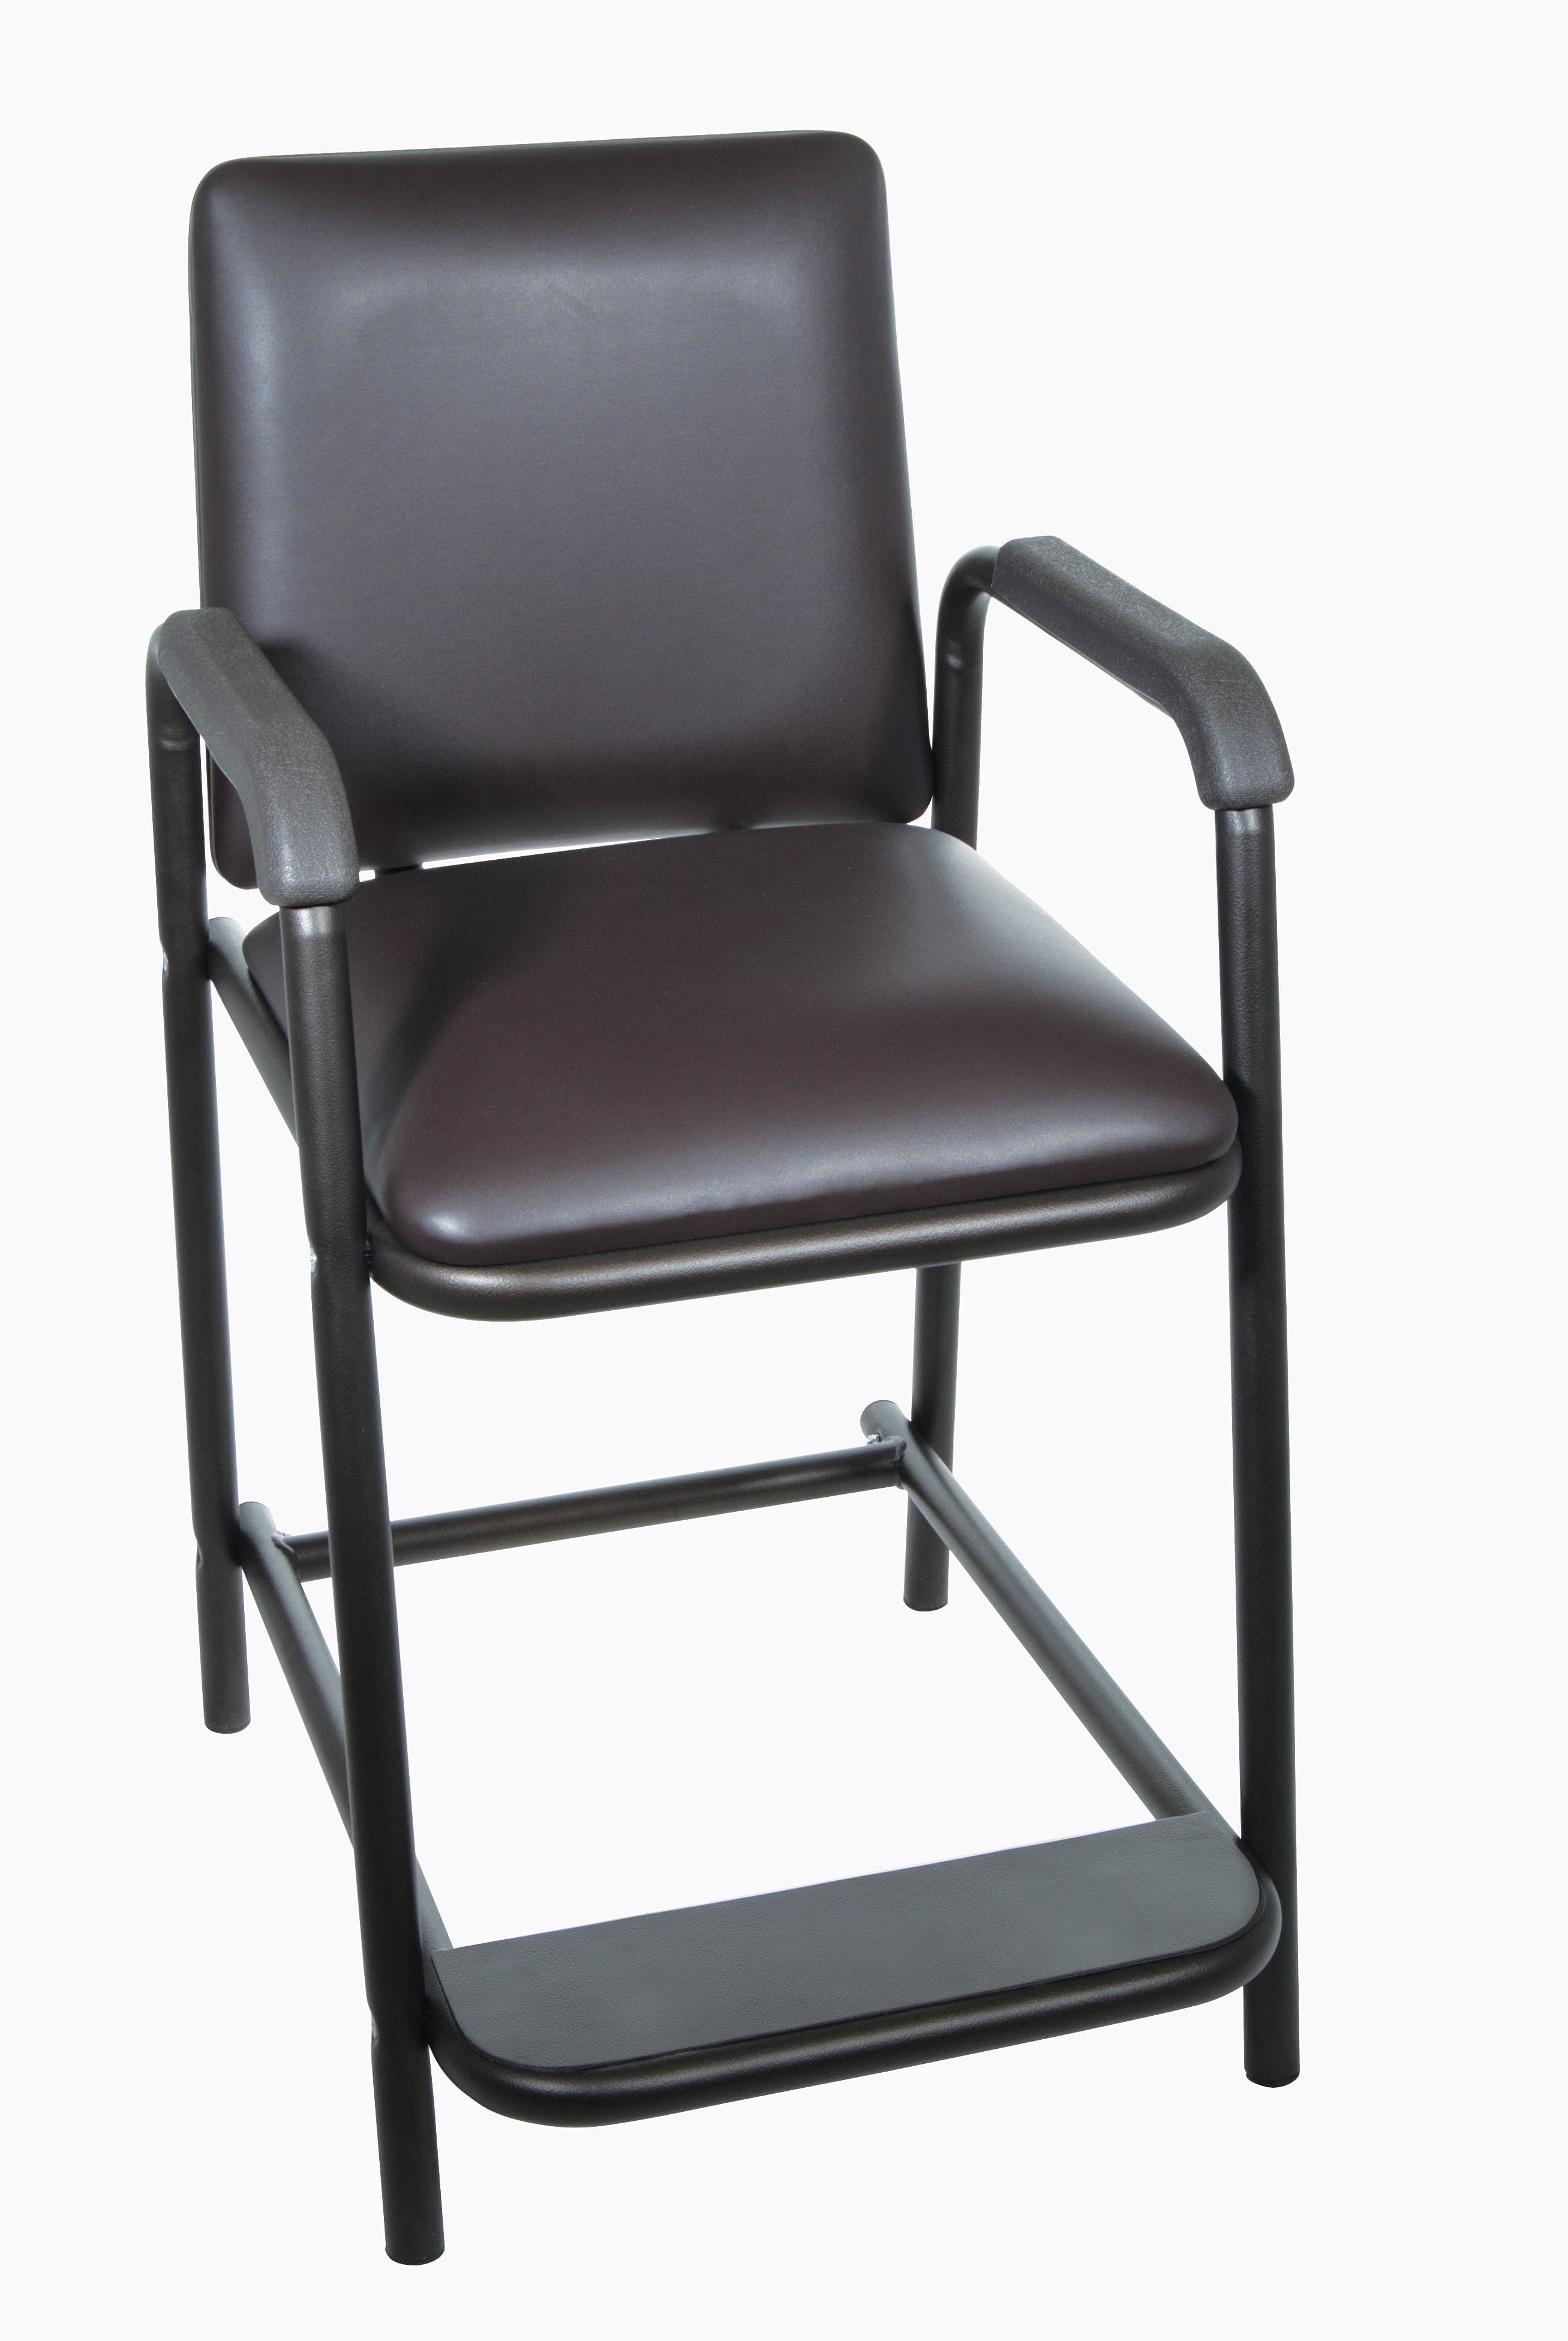 Drive Medical Drive Medical Hip High Chair with Padded Seat 17100-bv